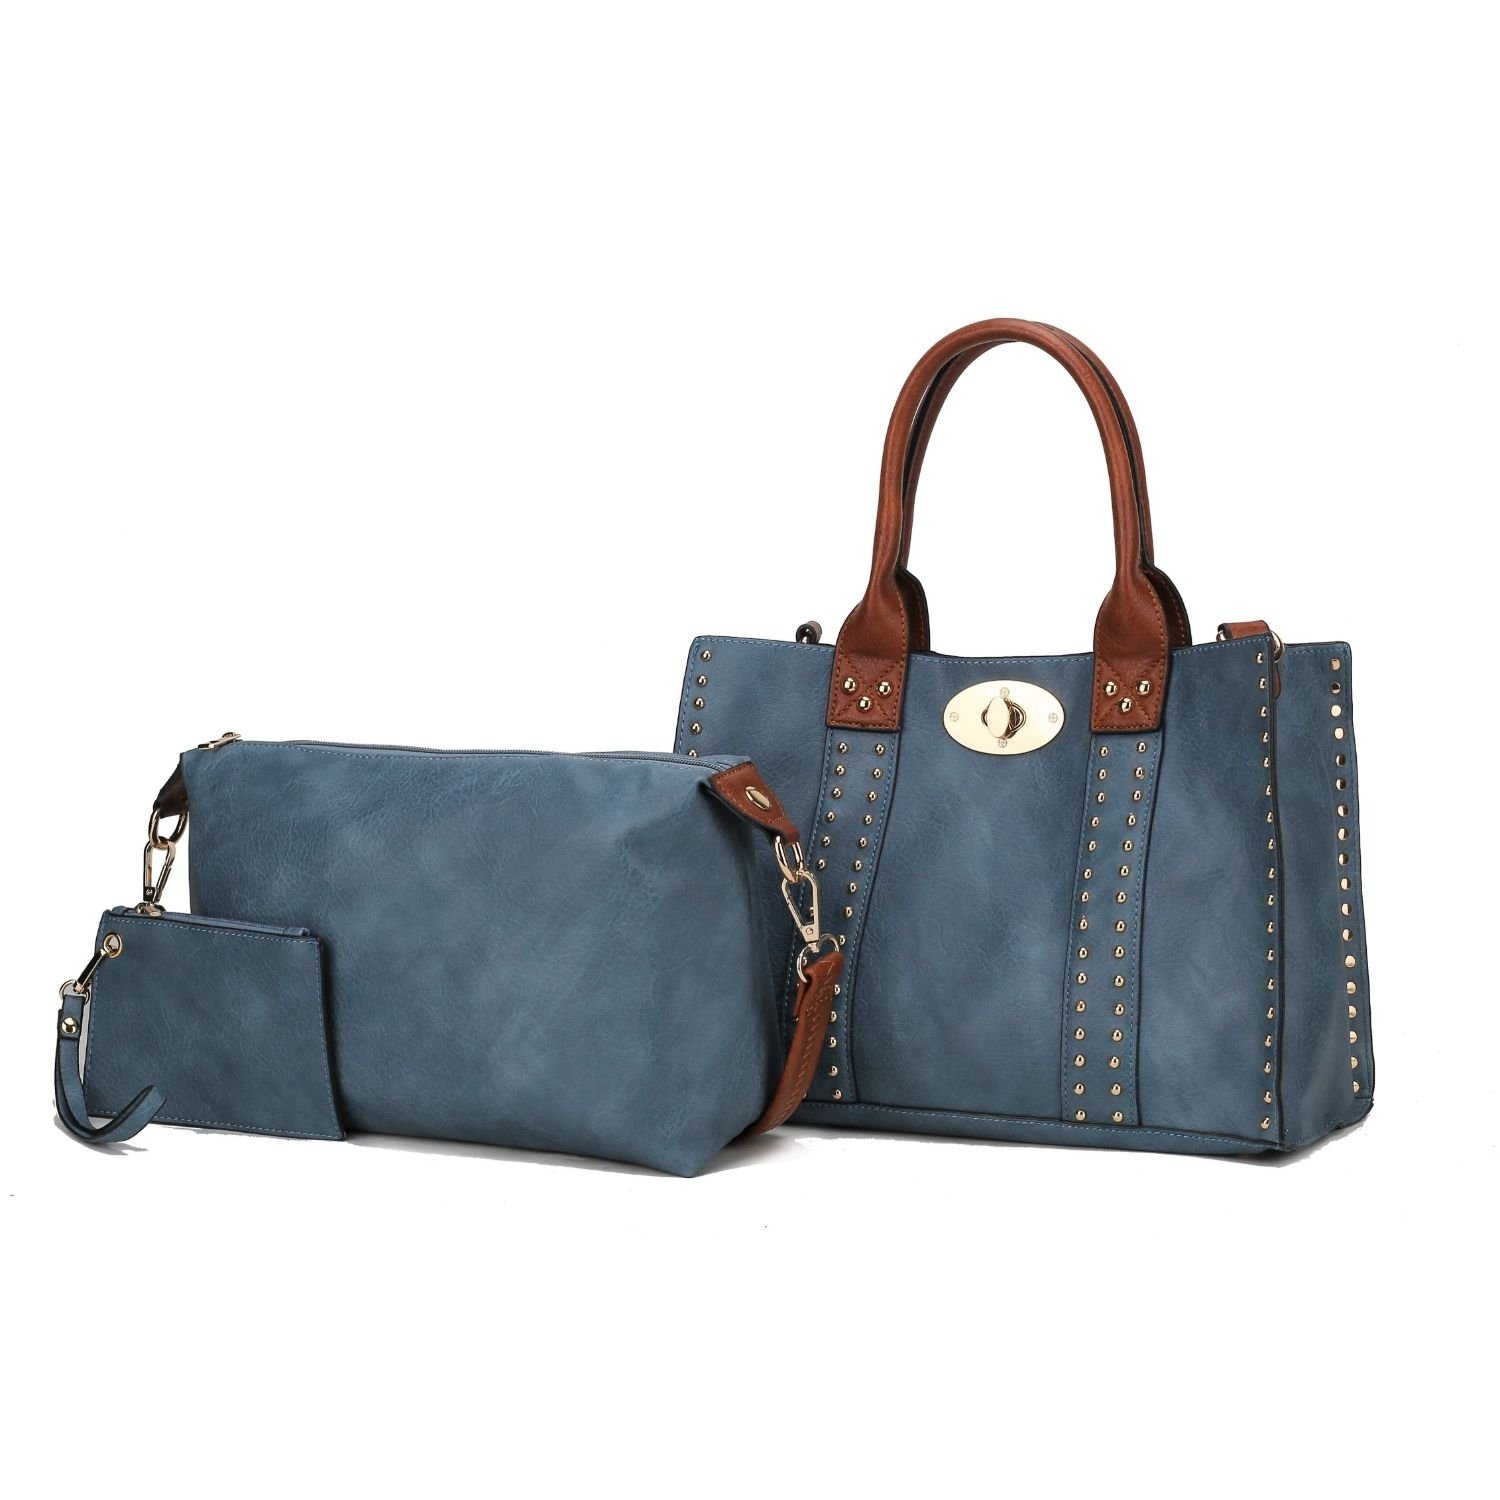 MKF Collection Elissa 3 Pc Set Satchel Handbag With Pouch & Coin Purse By Mia K. - Blue-brown